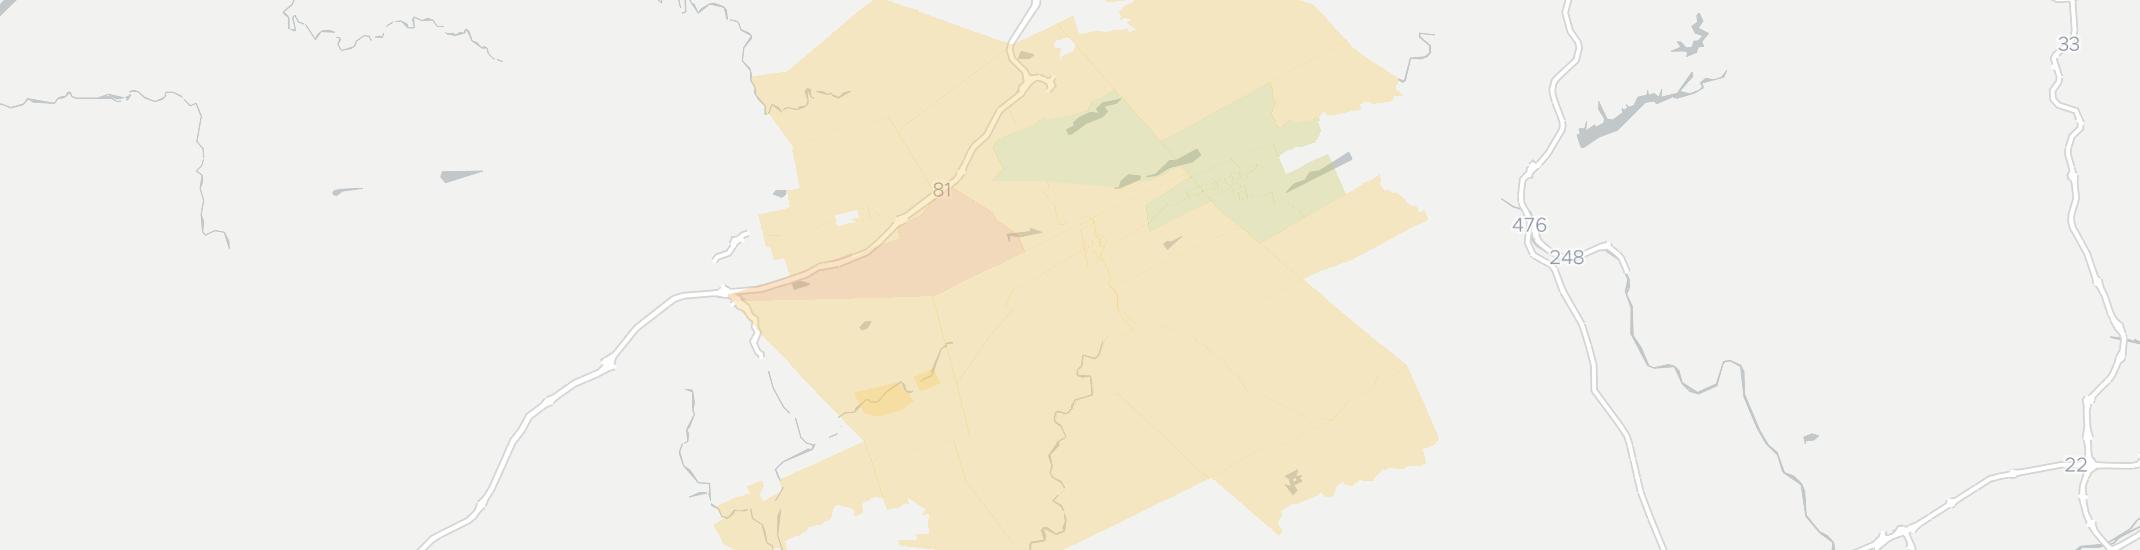 Tamaqua Internet Competition Map. Click for interactive map.